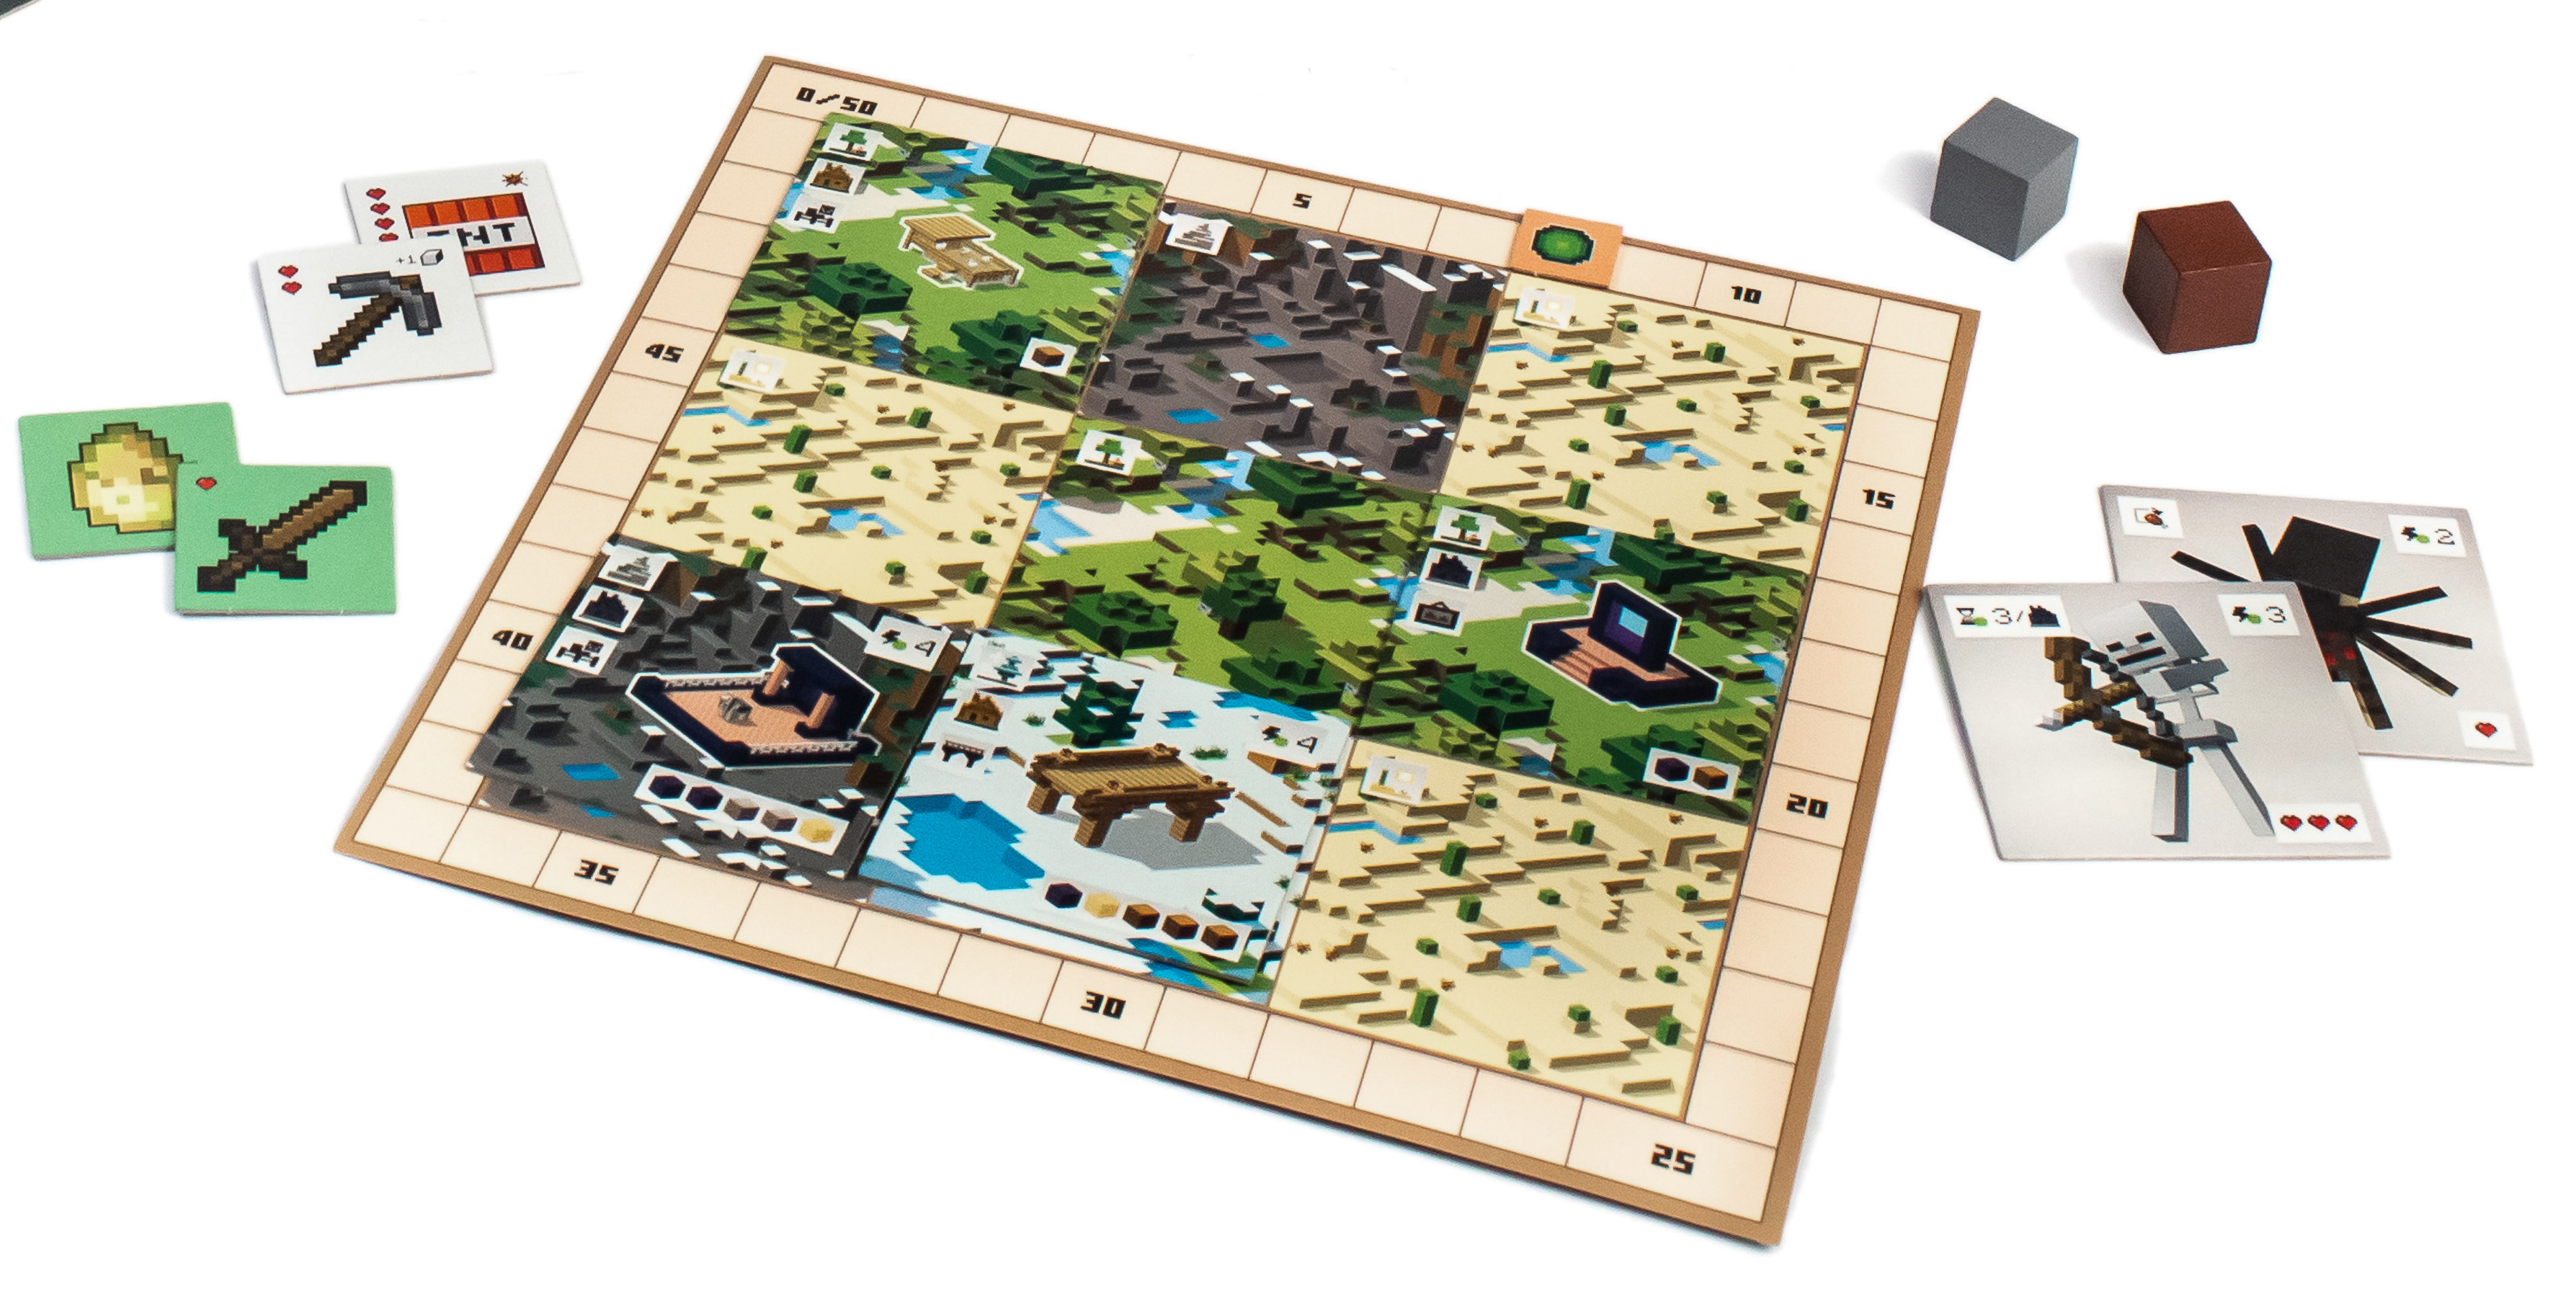 Minecraft: Builders & Biomes Brings the Action to (Board Game) Life